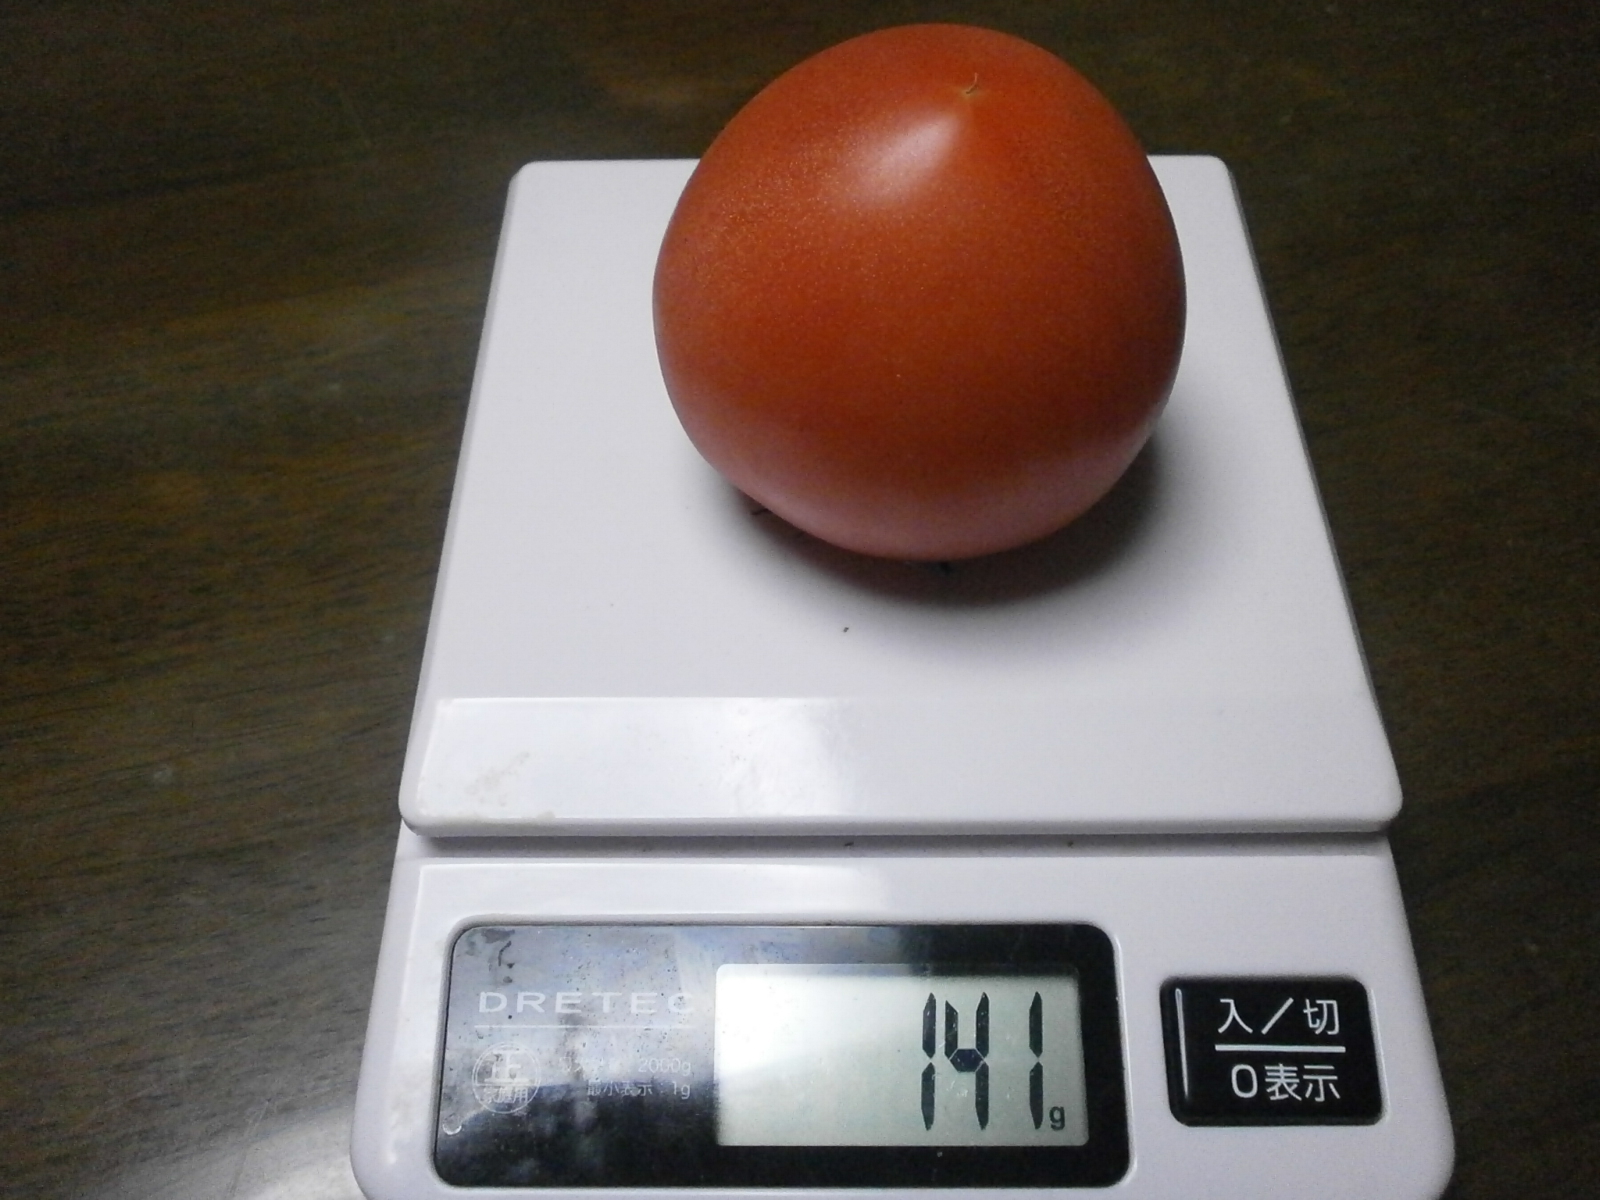 Tomate (141 / 136 g a 121 g/120 g g)